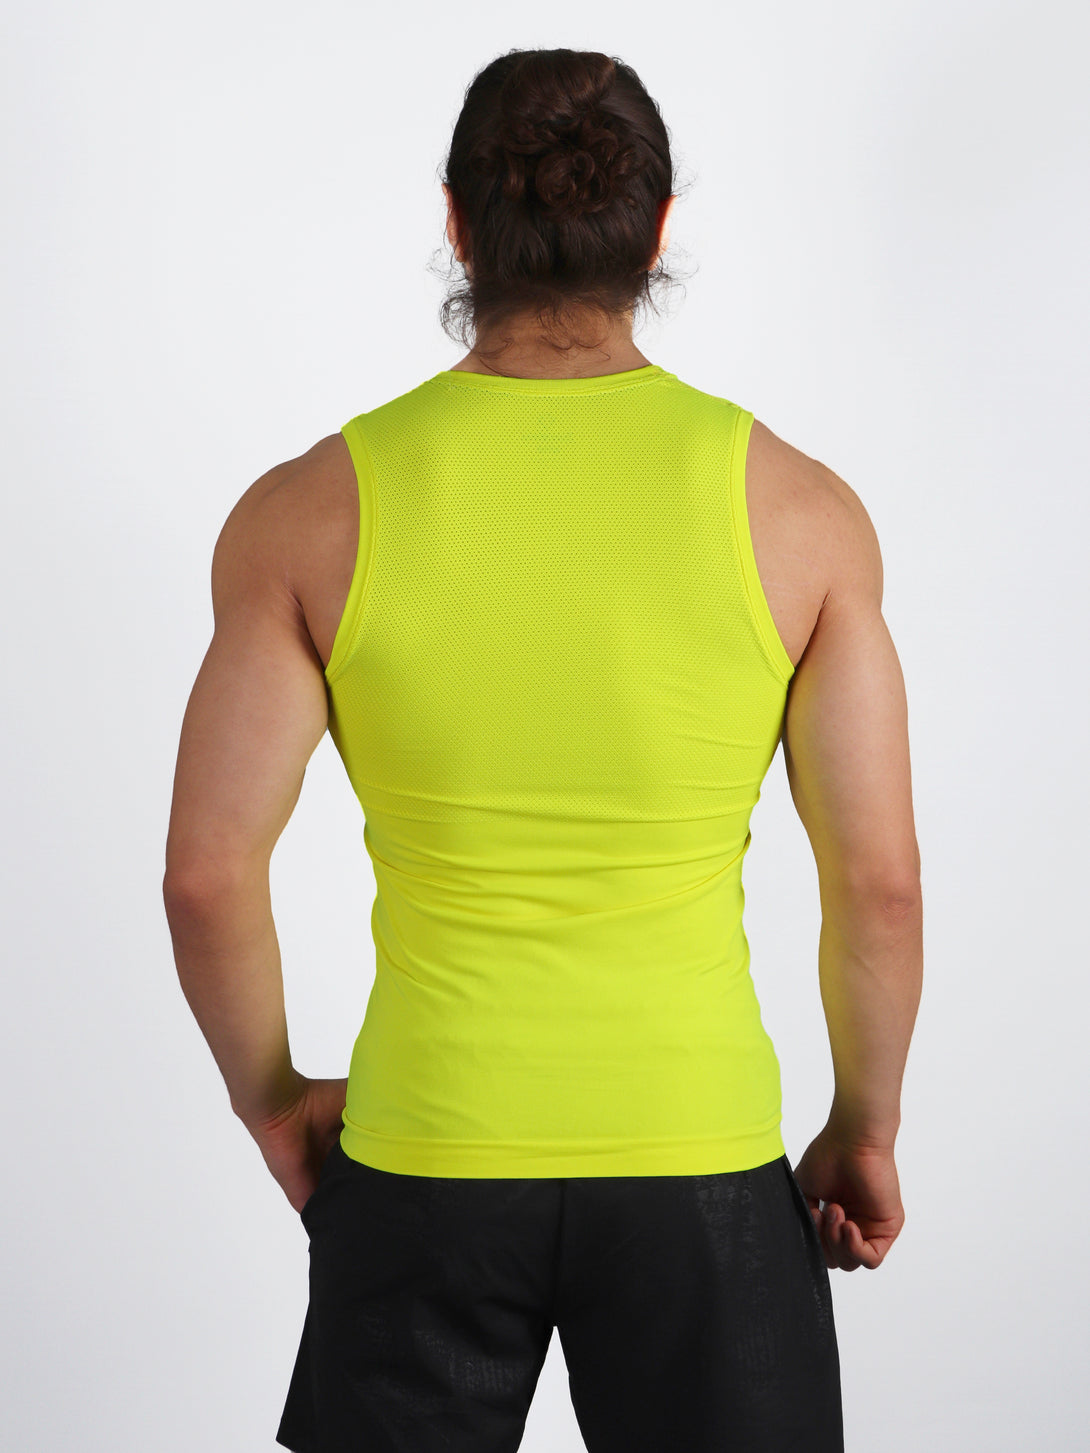 A Man Wearing Lime Color Seamless Mens Mesh Tank Top